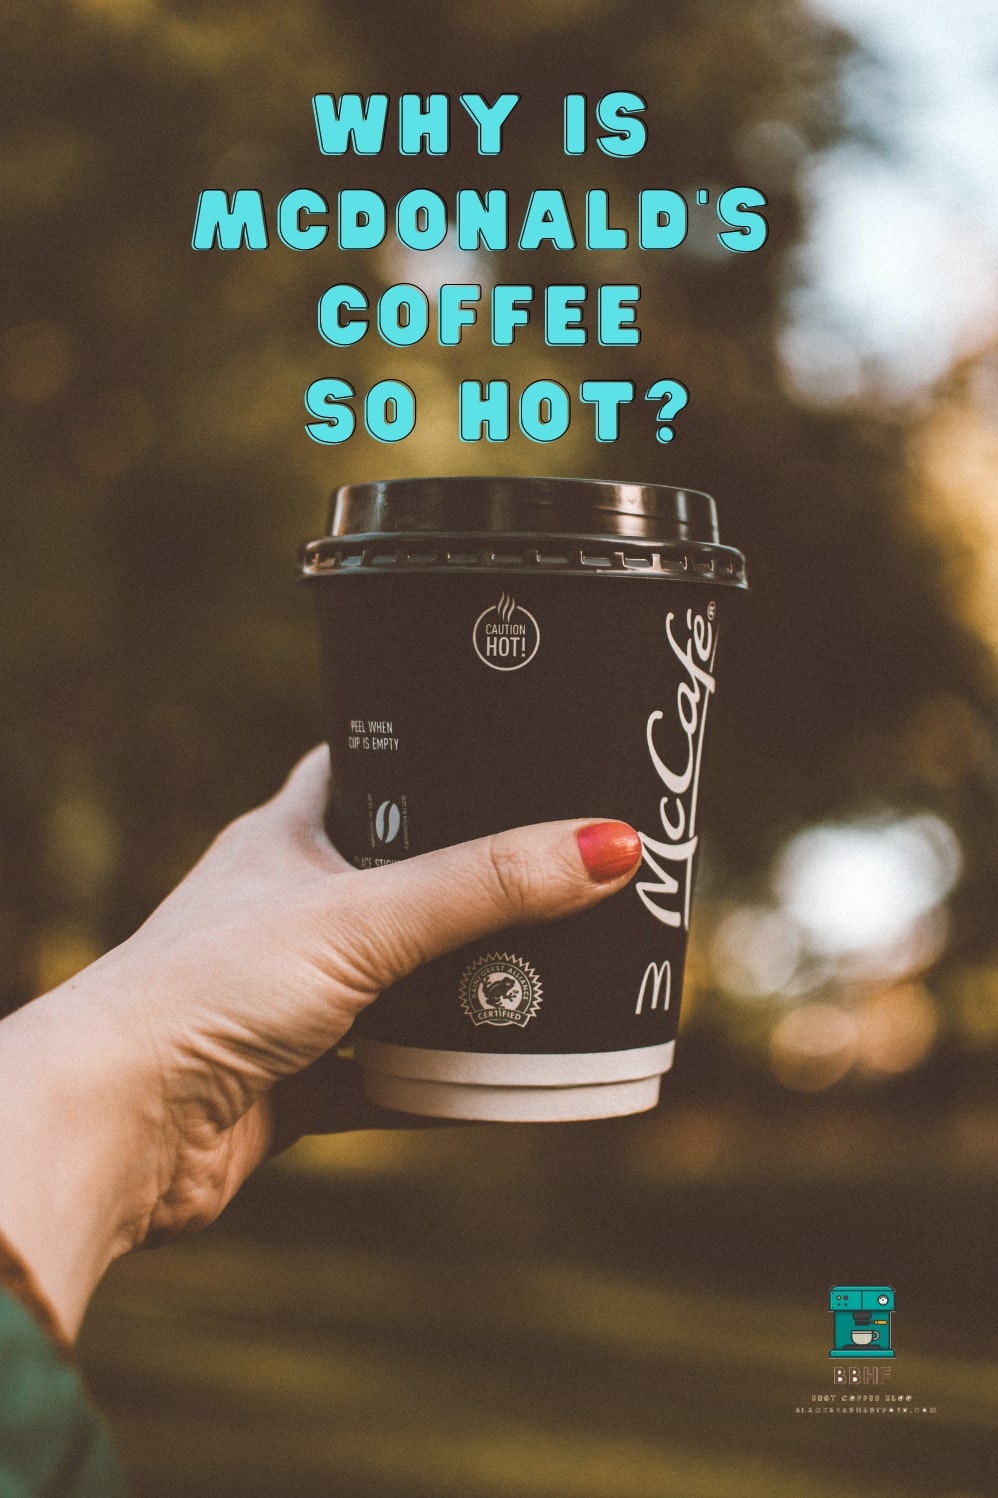 why is mcdonald's coffee hot?